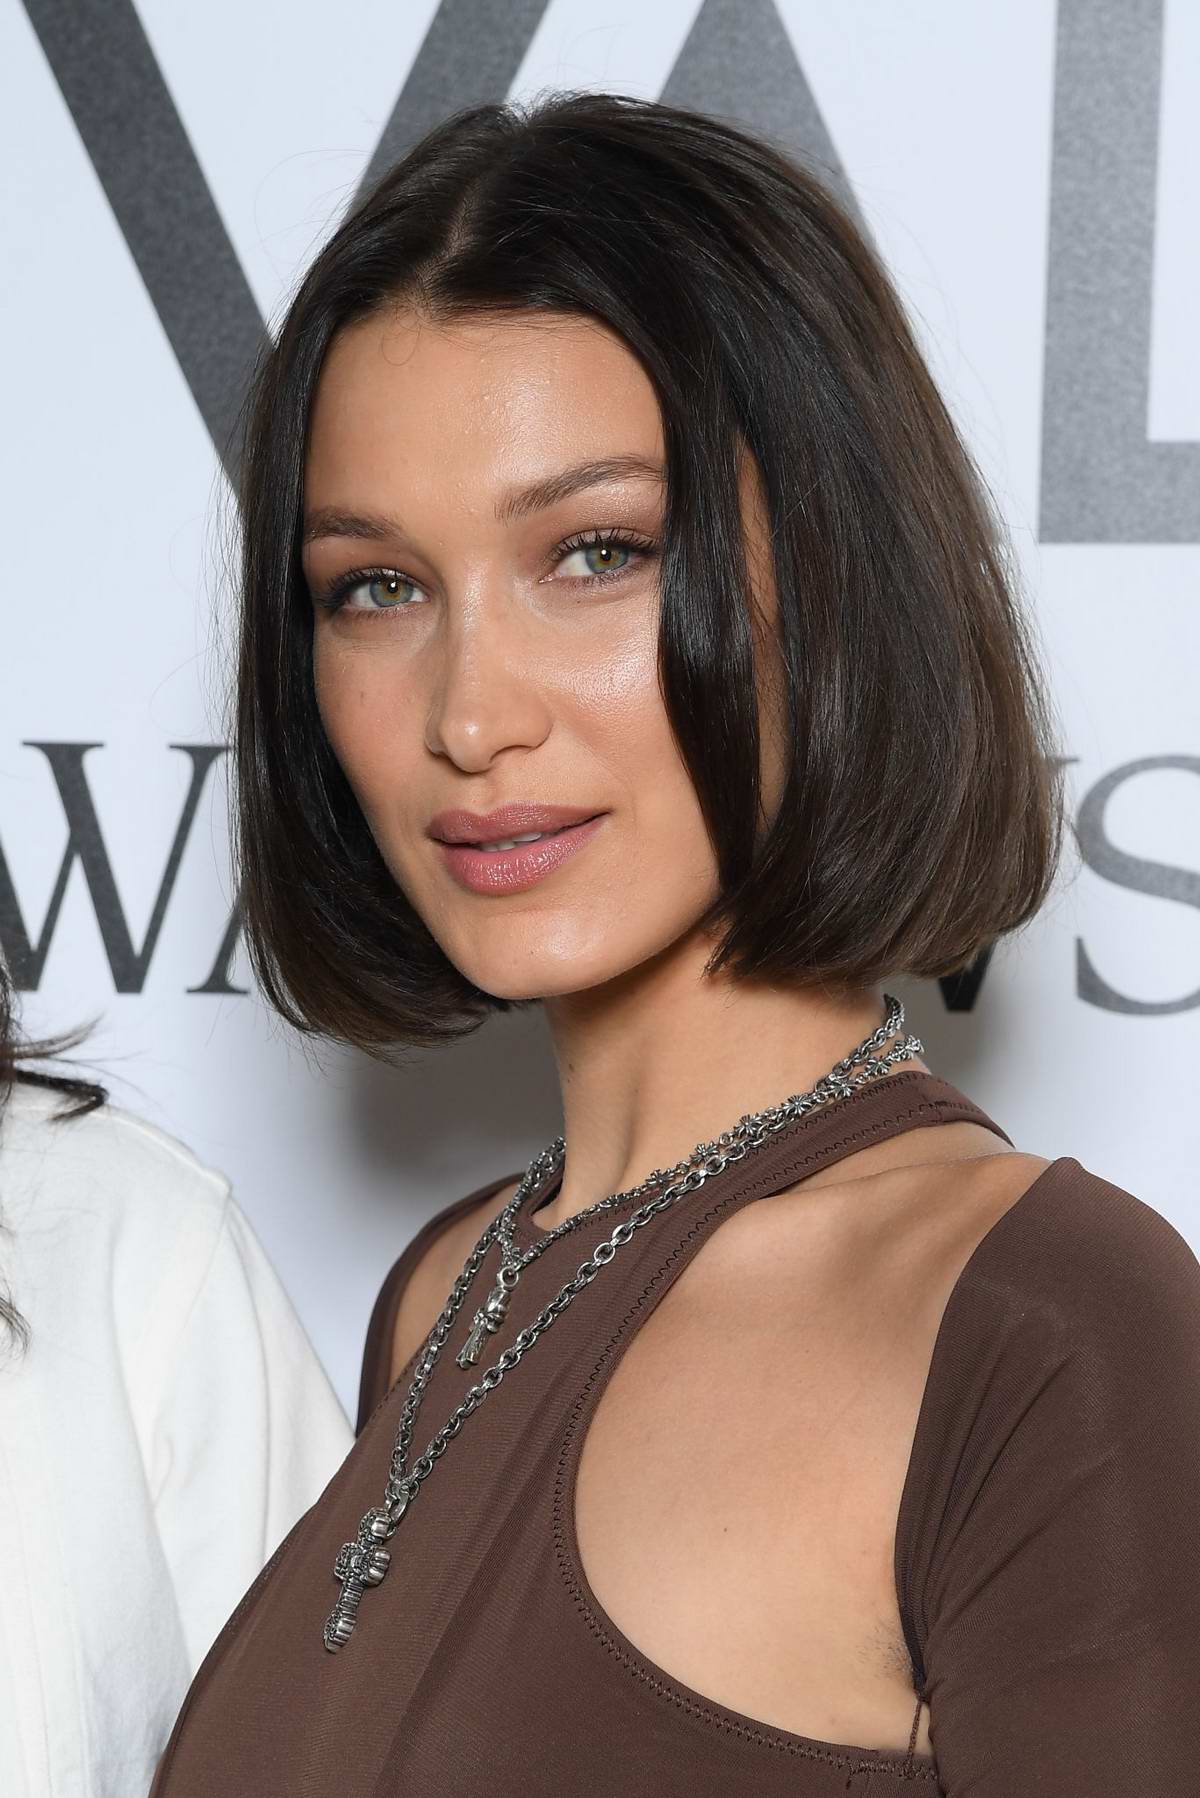 bella hadid attends vogue fashion festival photocall in paris, france ...